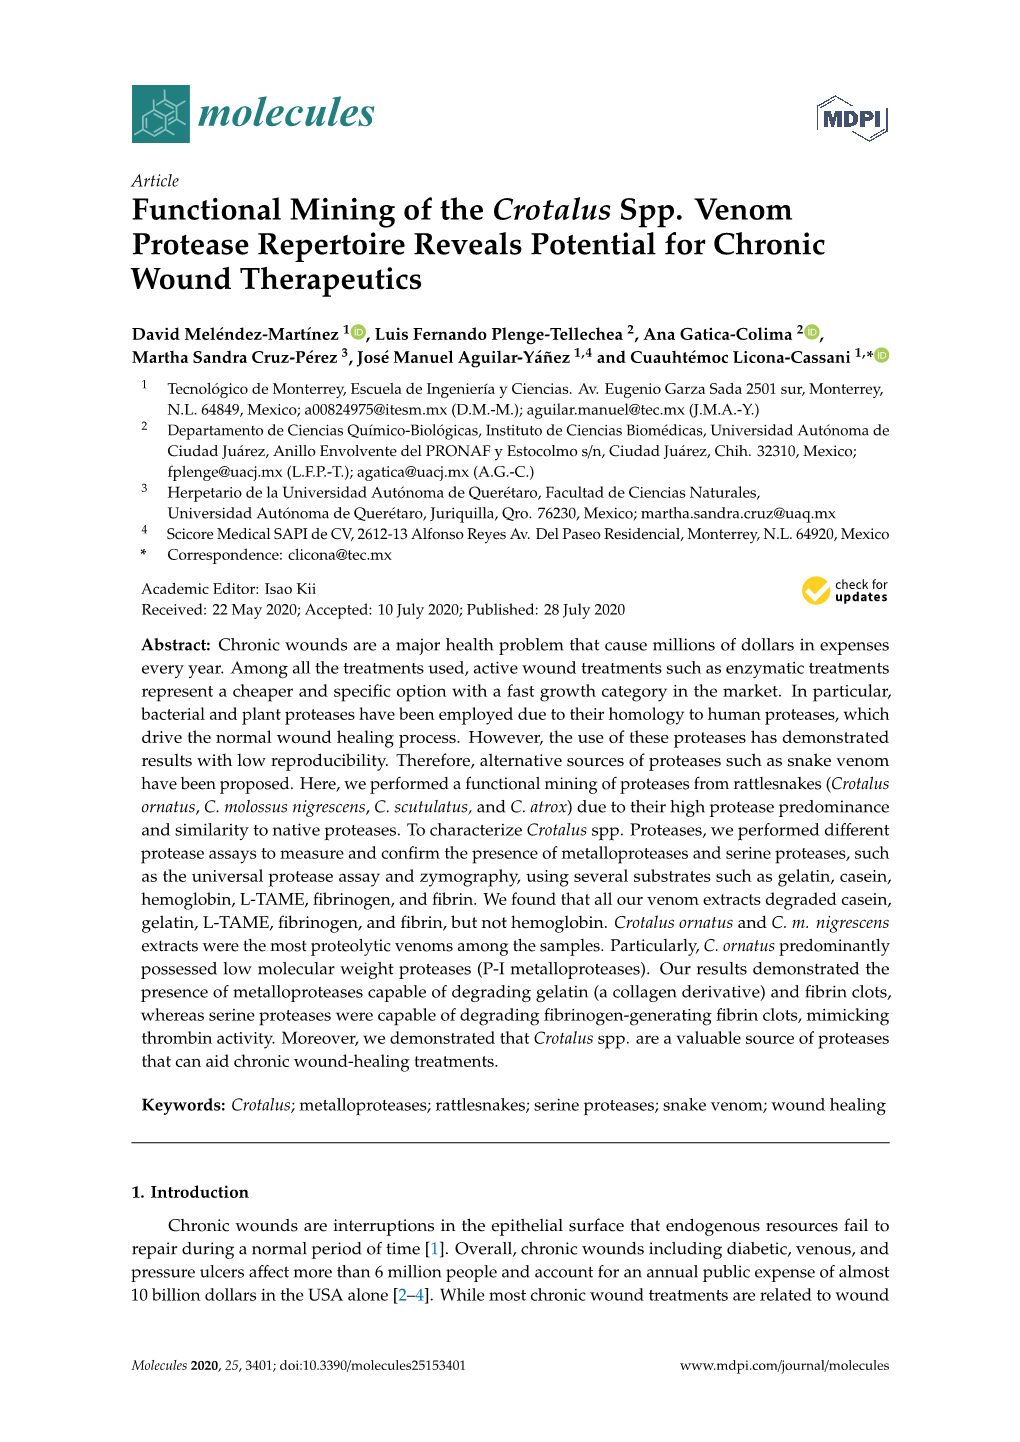 Functional Mining of the Crotalus Spp. Venom Protease Repertoire Reveals Potential for Chronic Wound Therapeutics